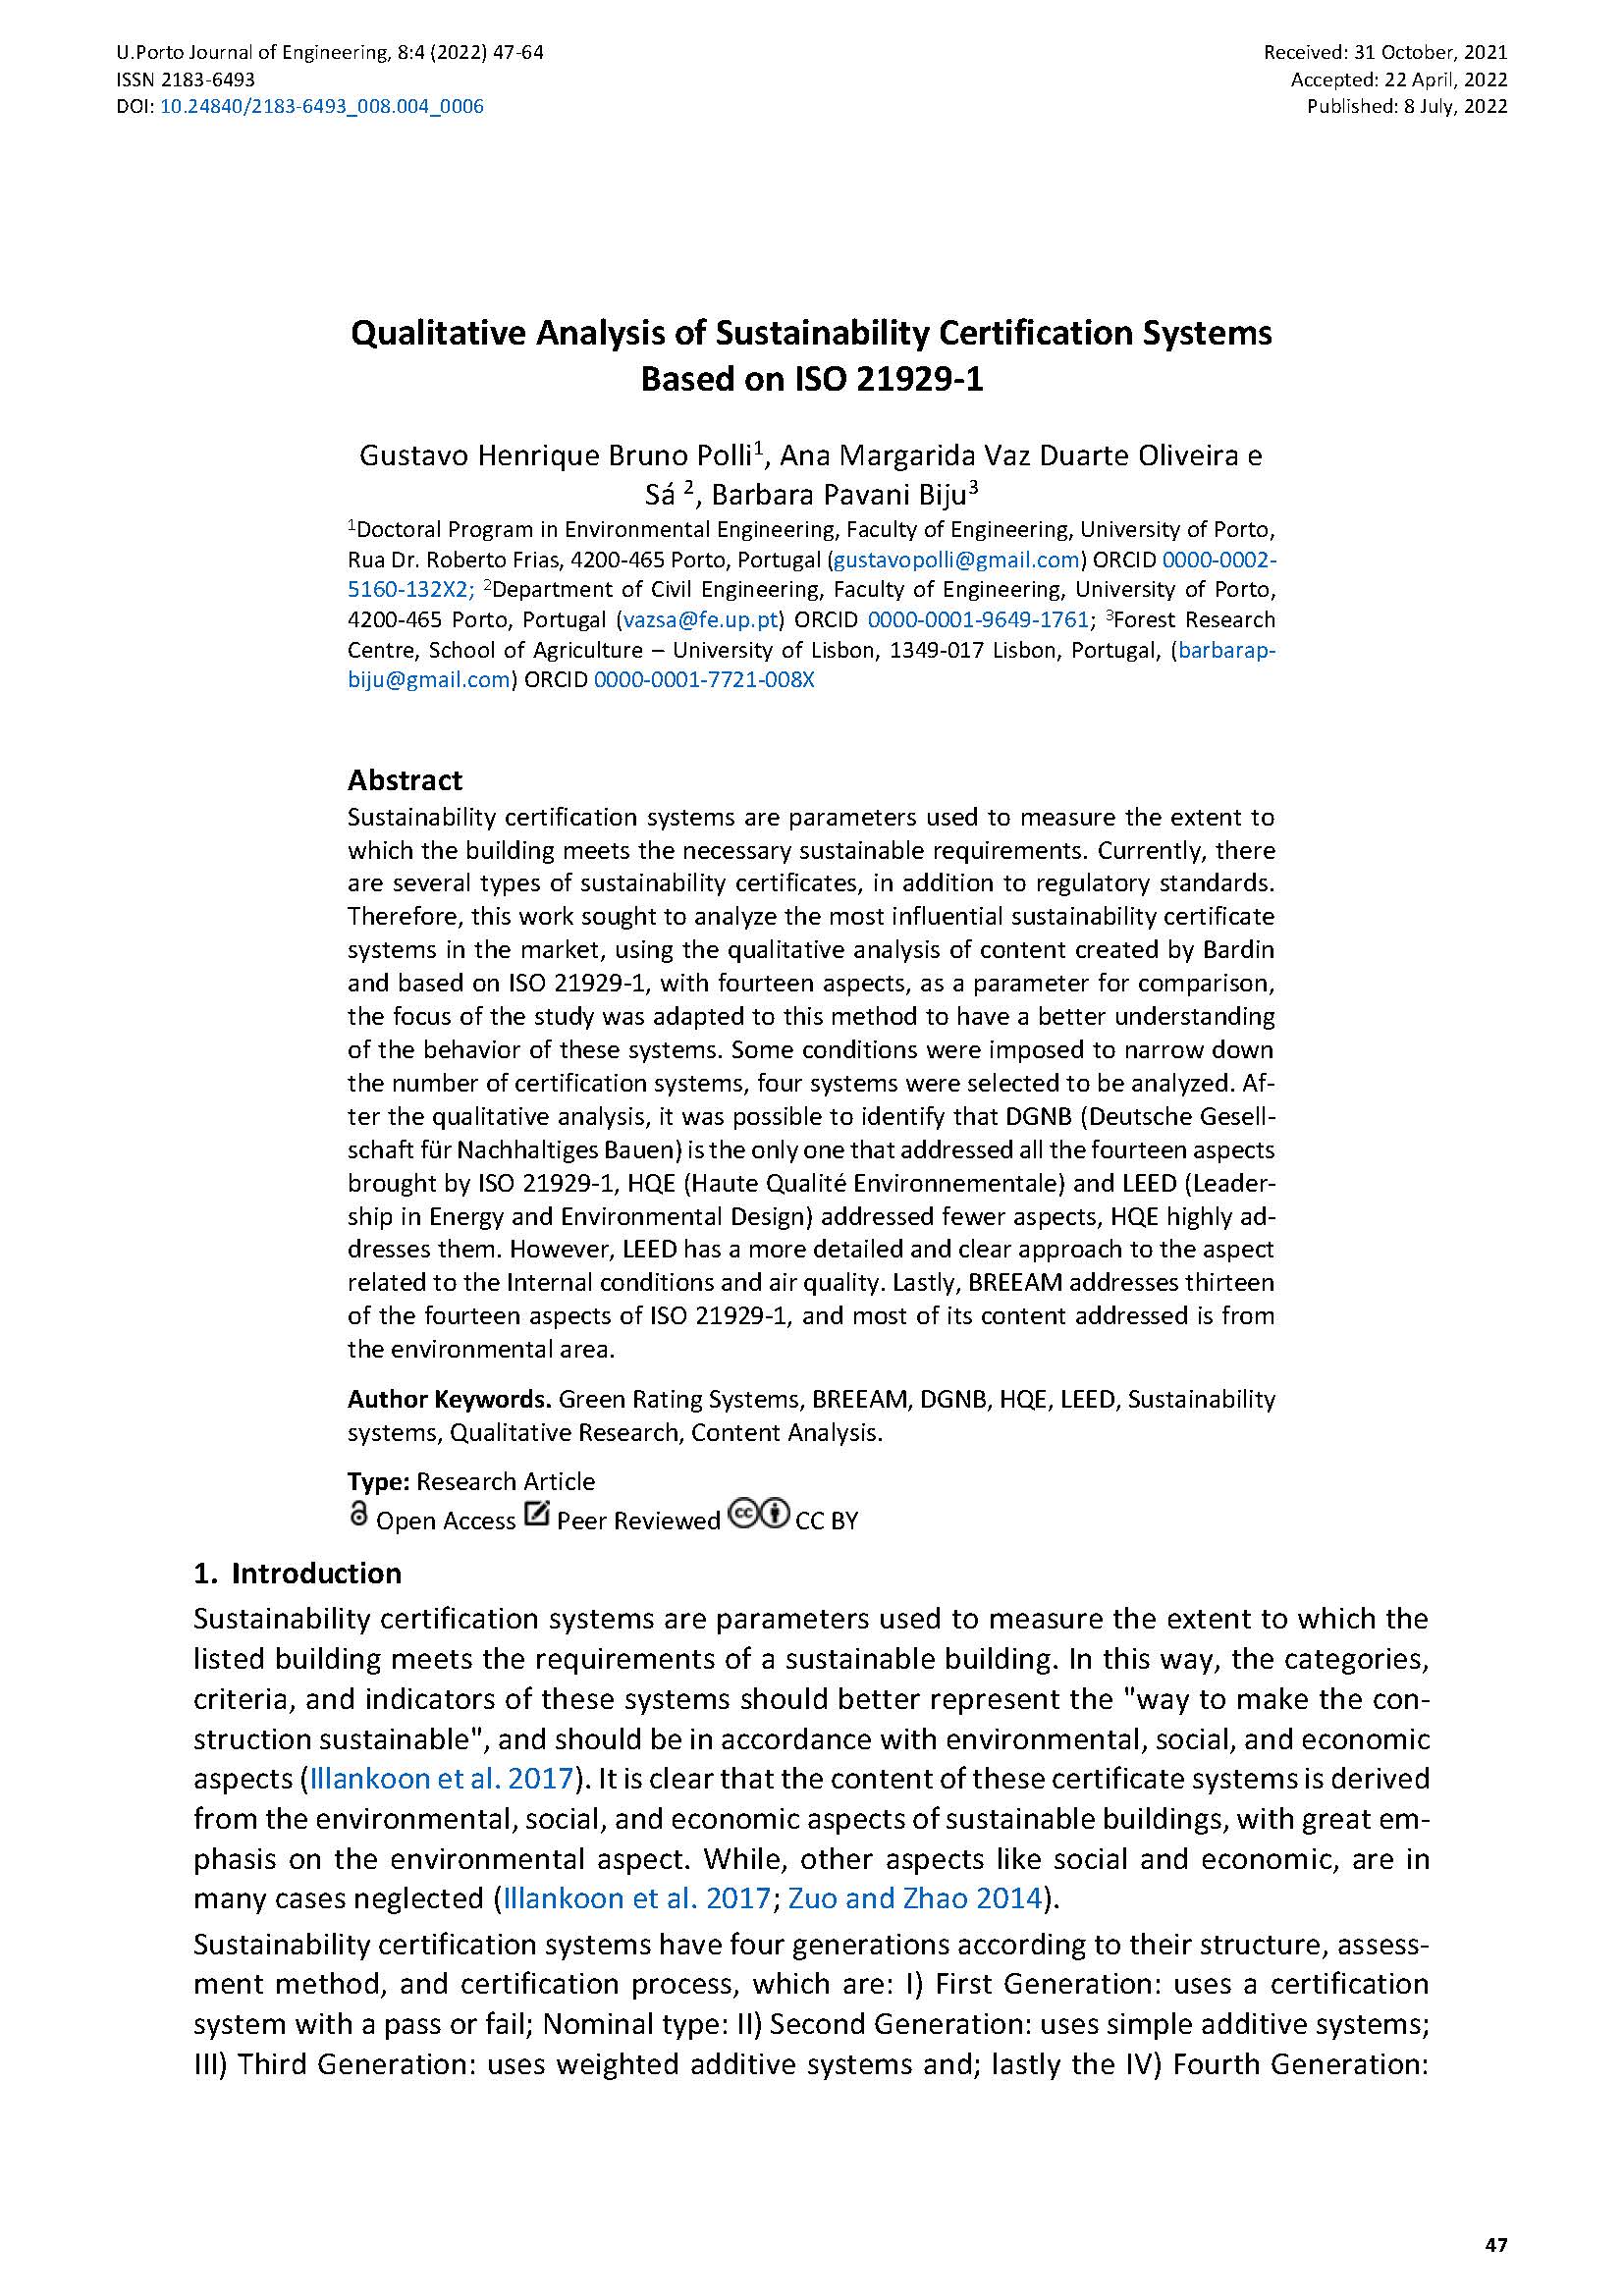 Qualitative Analysis of Sustainability Certification Systems Based on ISO 21929-1